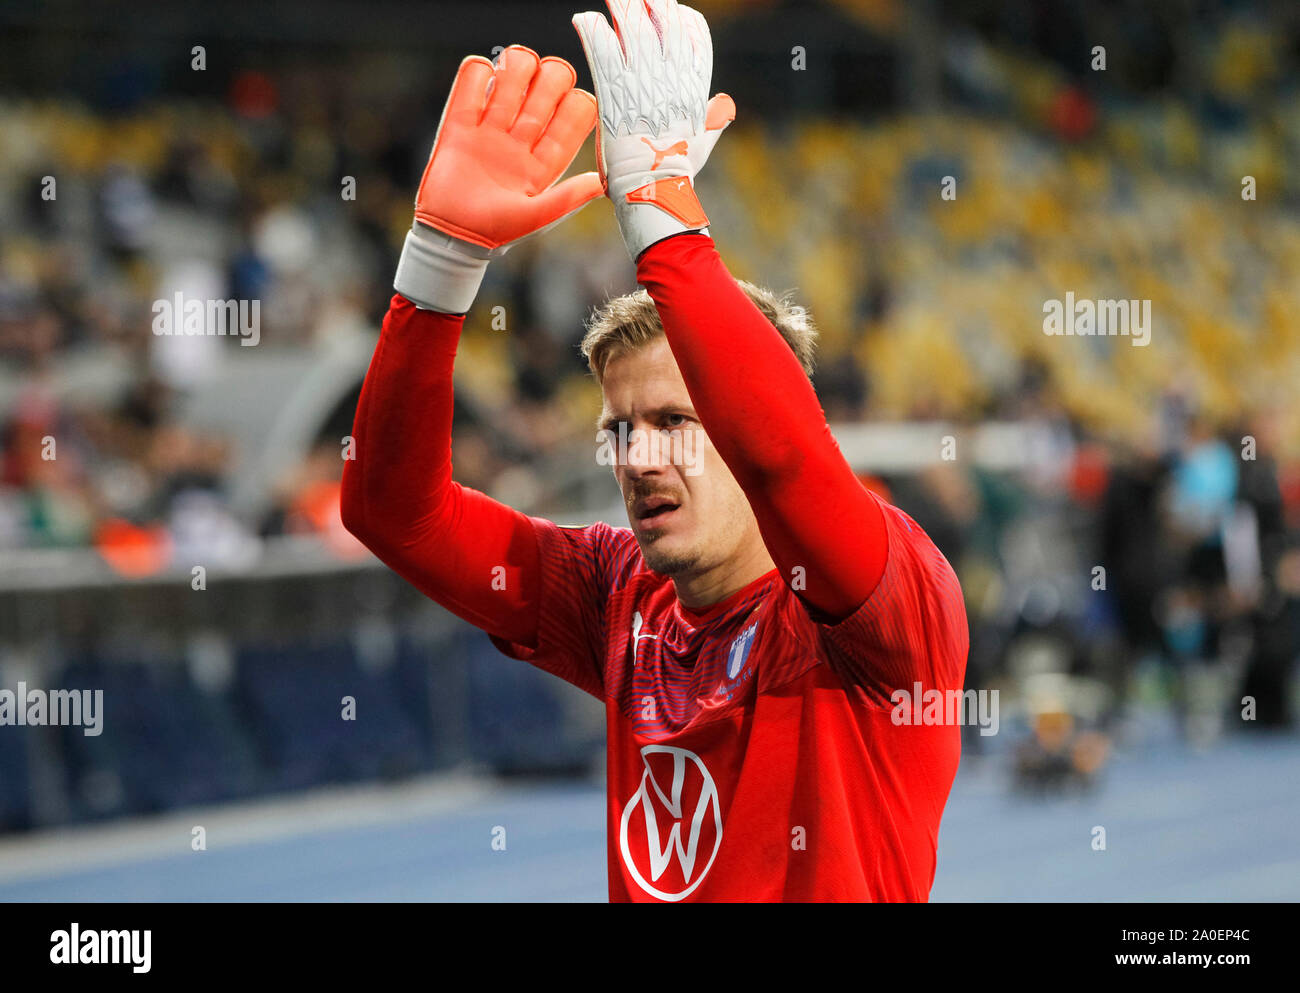 Ukraine Goalkeeper High Resolution Stock Photography and Images - Alamy